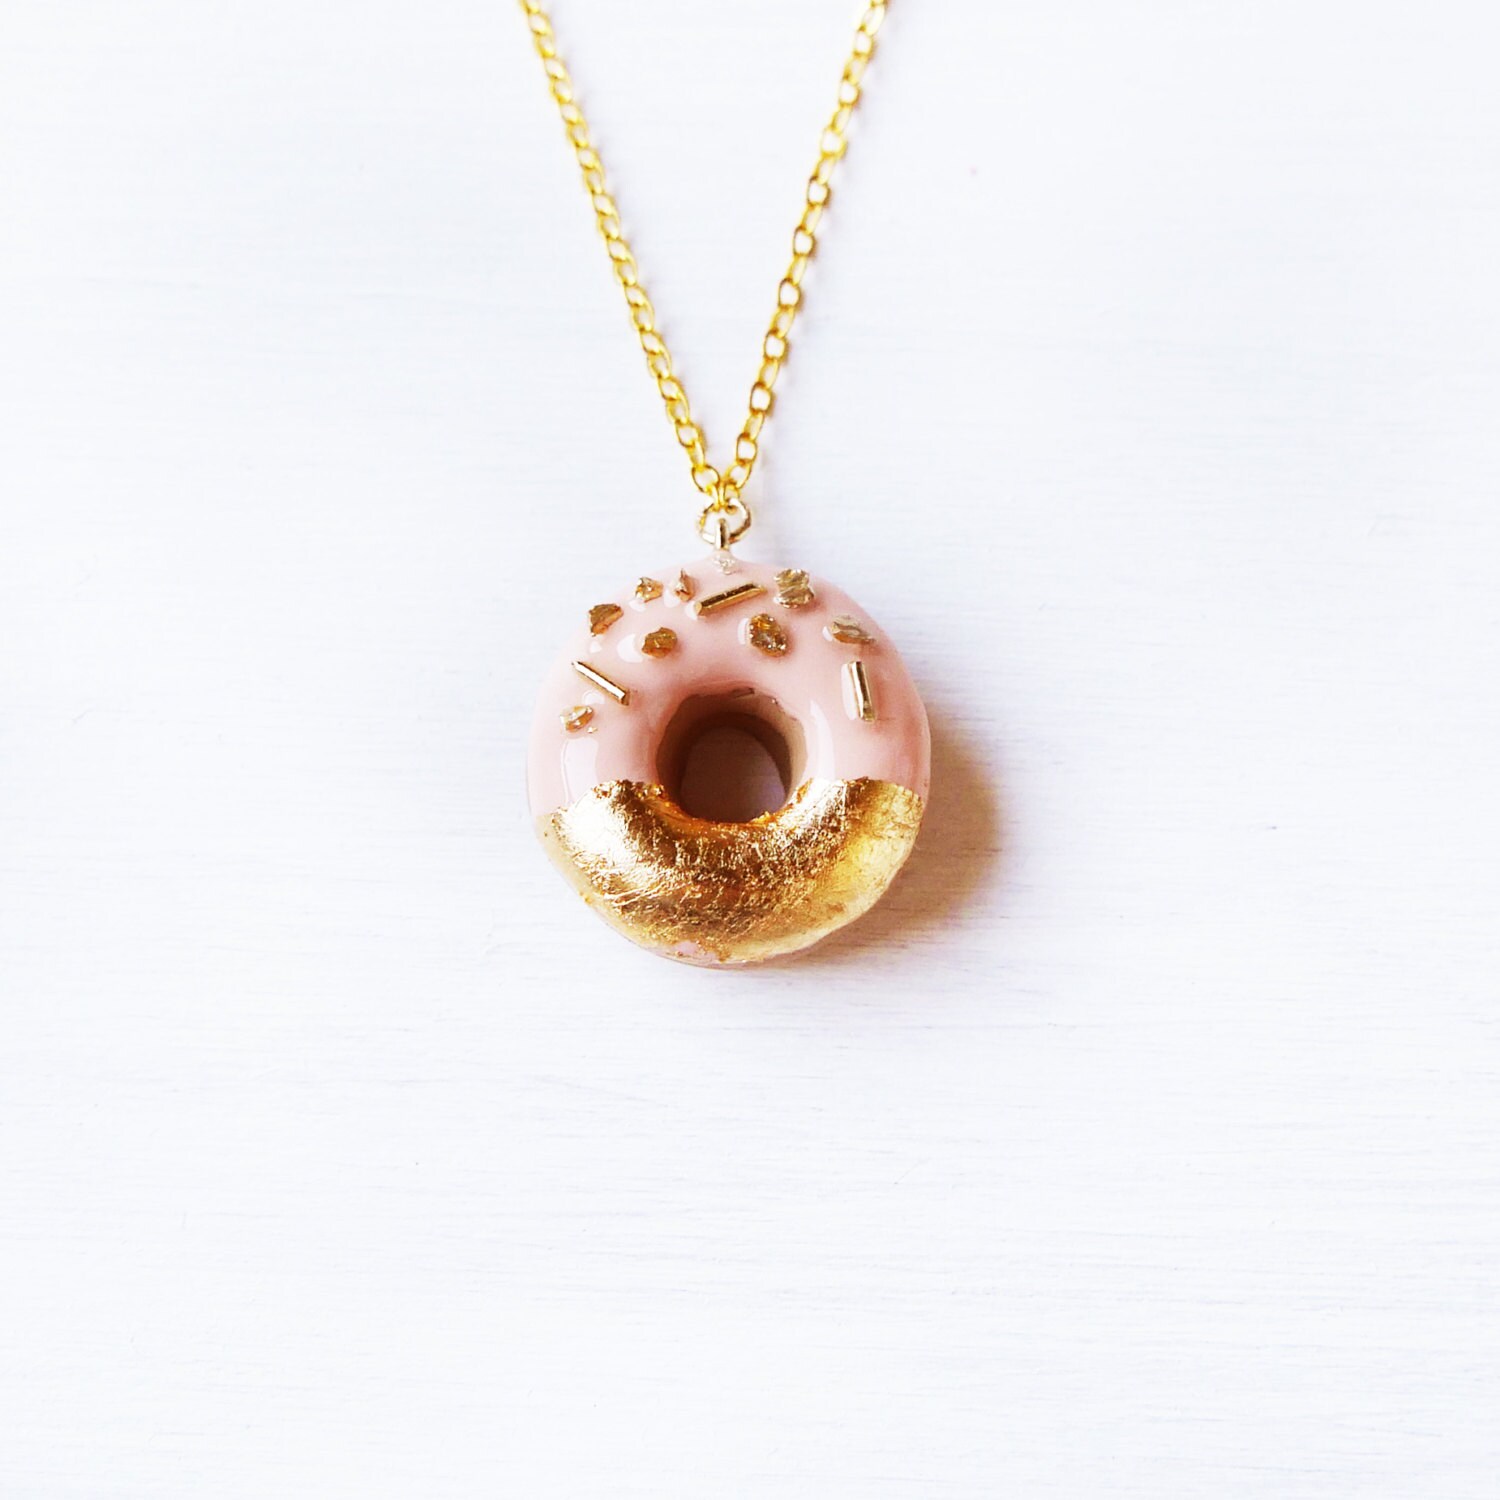 Smooth Donut Bead Pinch Bail Pendant Necklace Setting Sterling